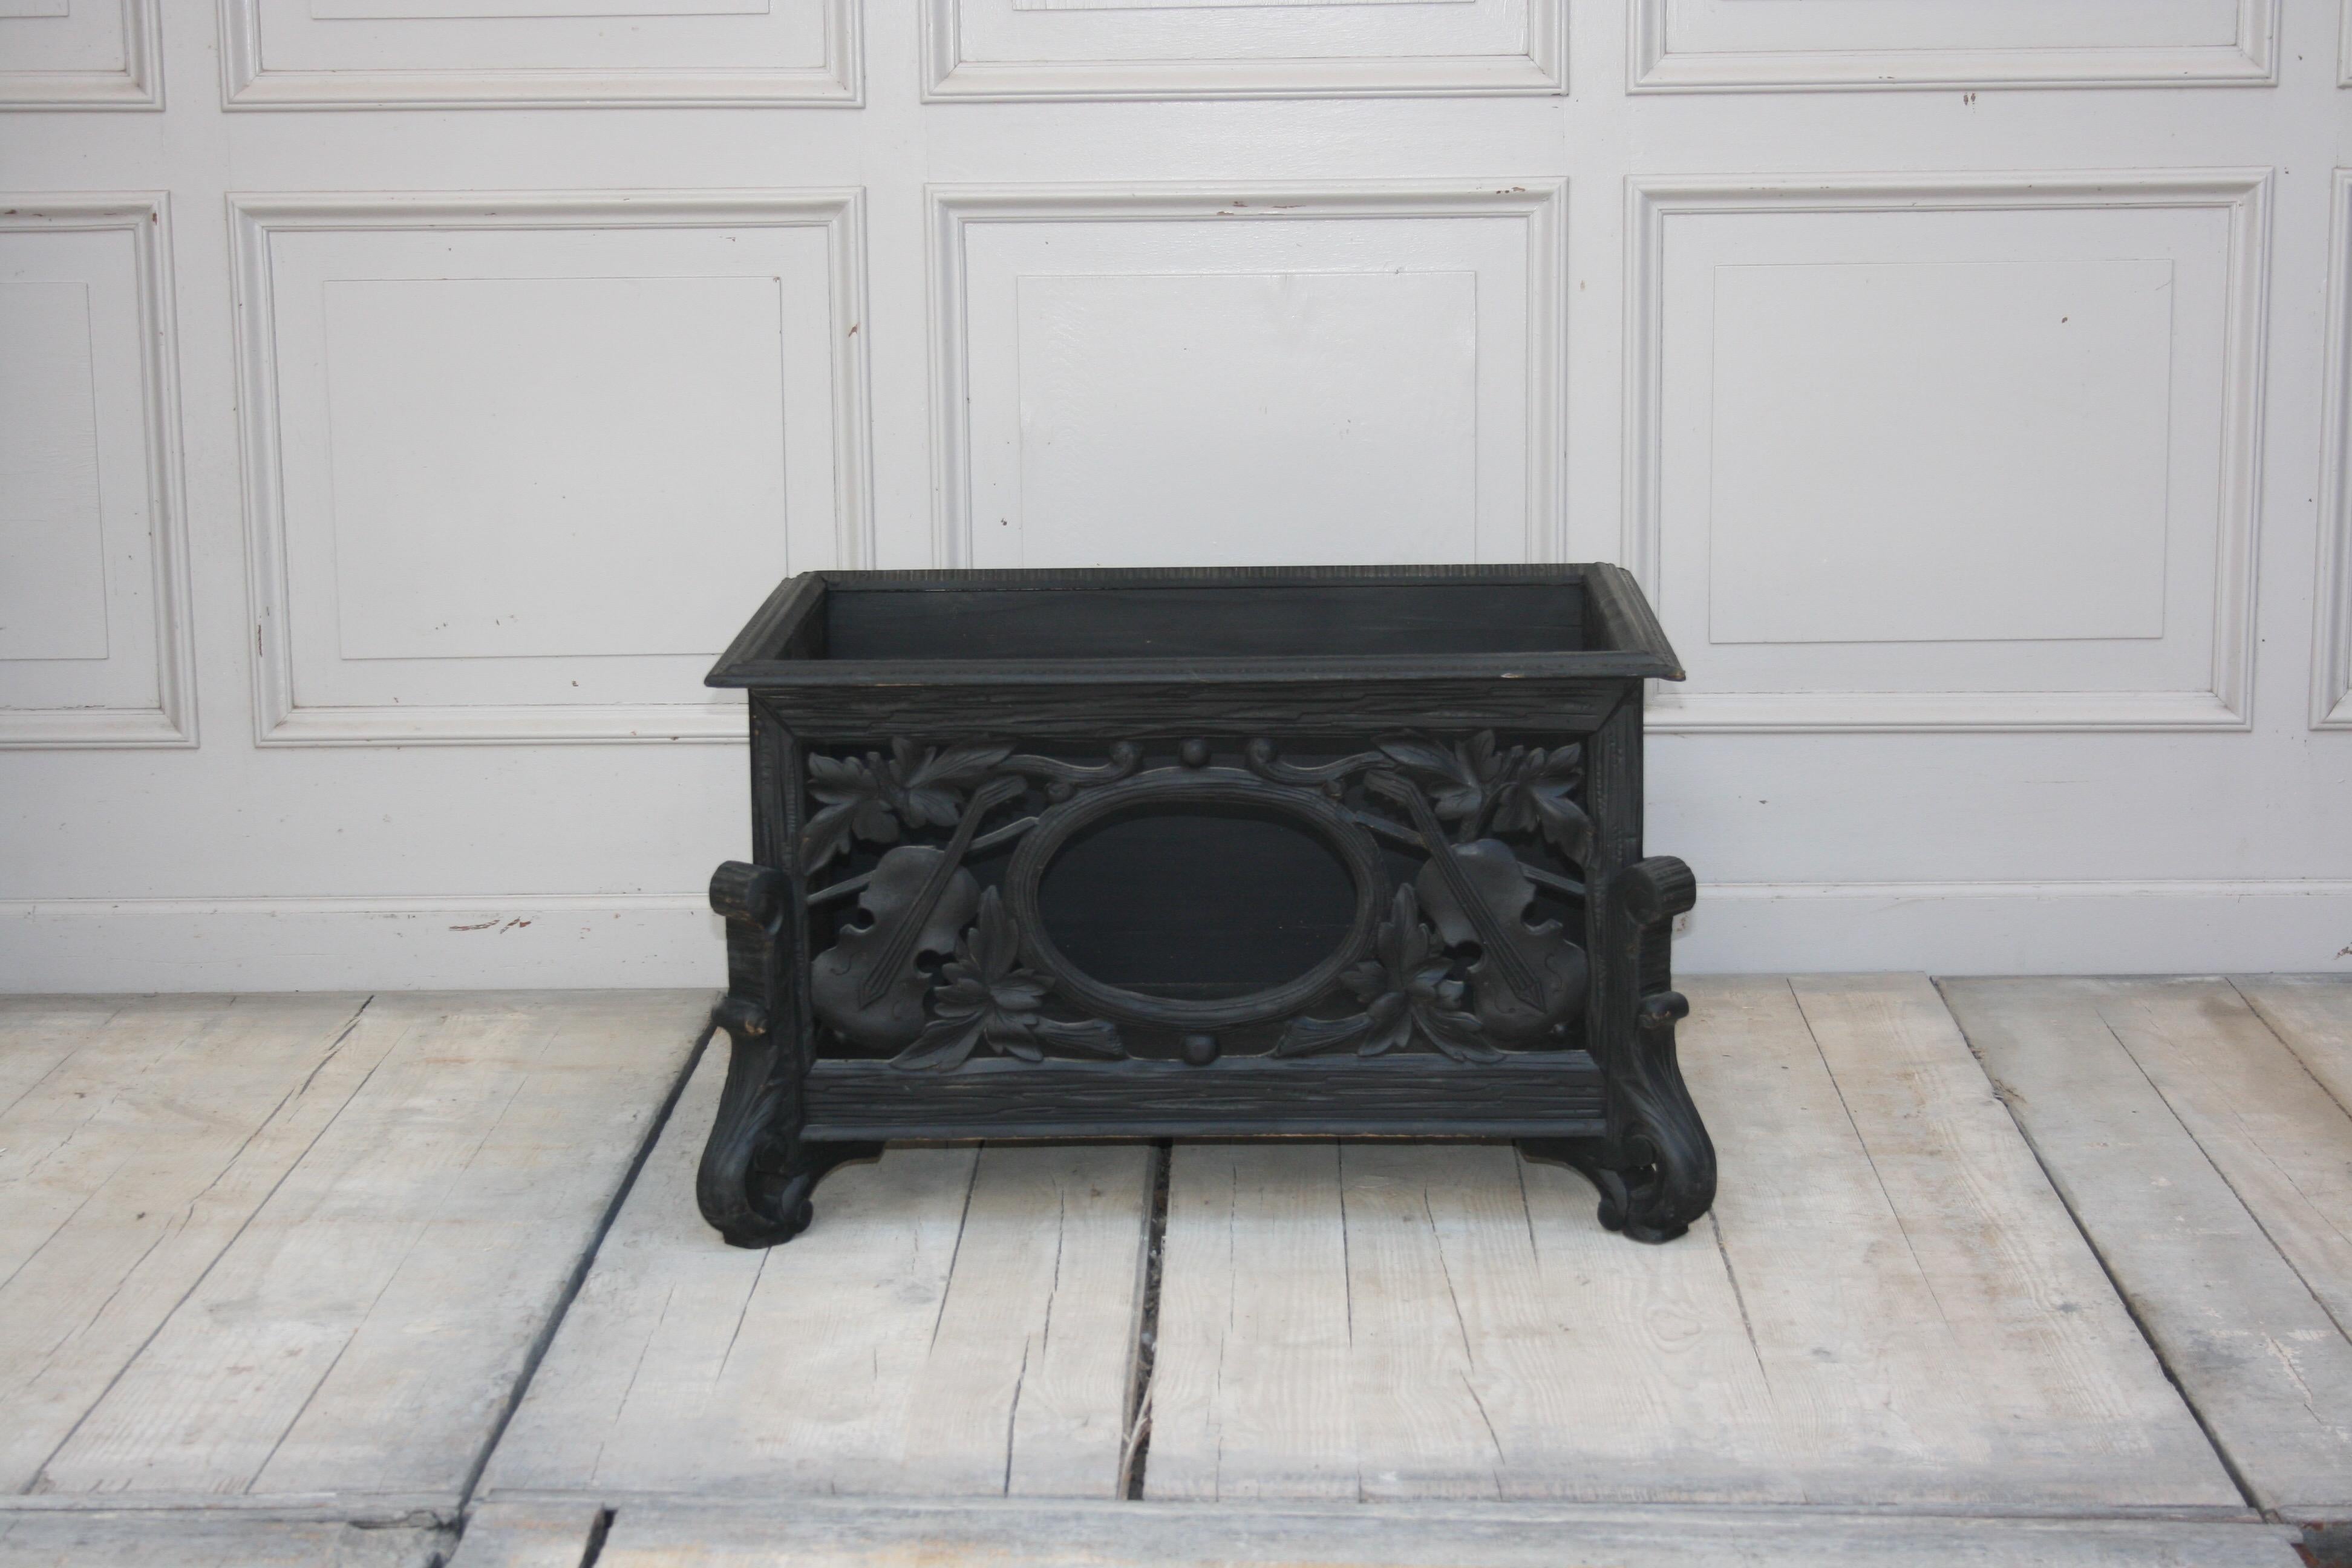 Antique German open chest/box in black from approximate 1860 presumably for the storage of music notes.

Dimensions: 44 cm high, 71 cm wide, 51 cm deep.